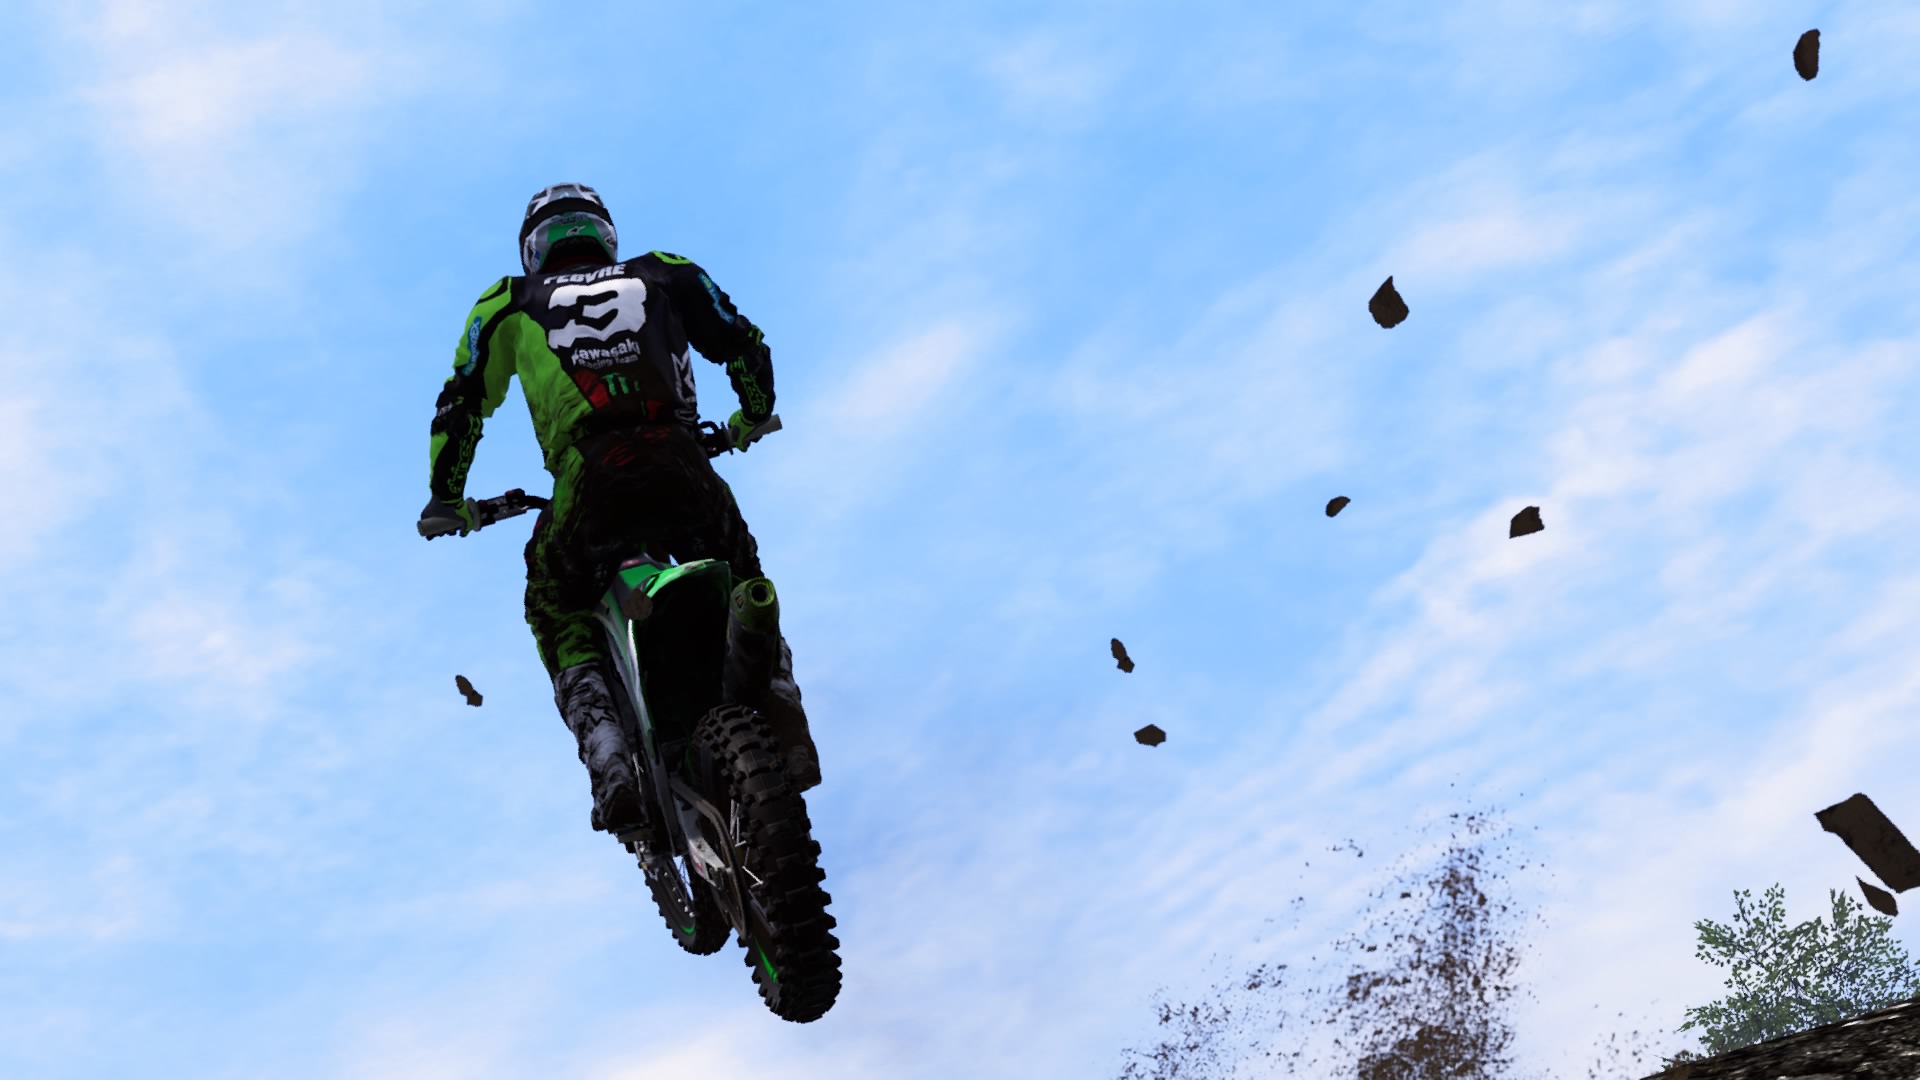 MXGP 2020 test, very ambitious game